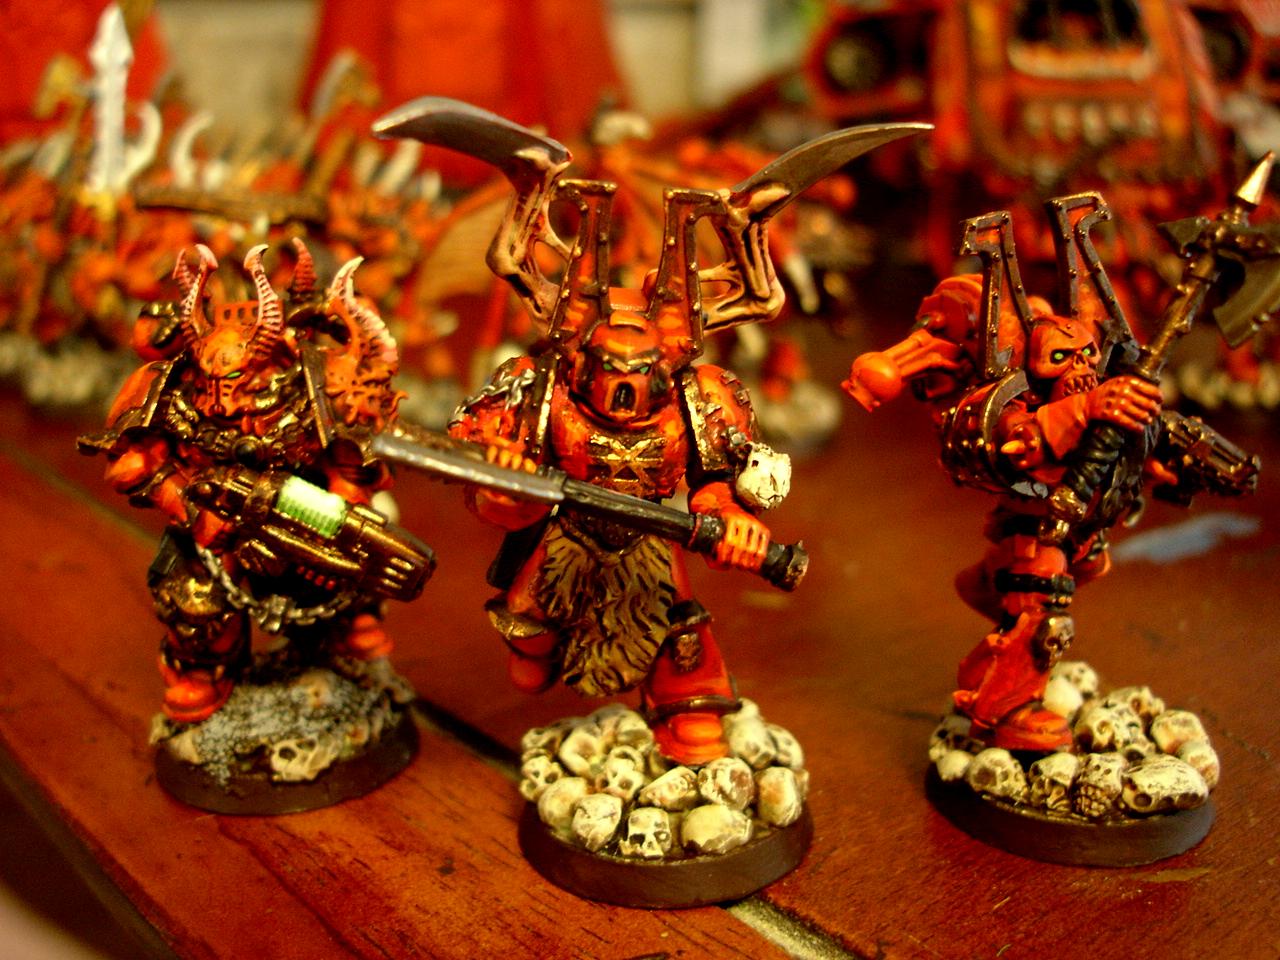 Chaos, Khorne, Space Marines, Warhammer 40,000, World Eaters